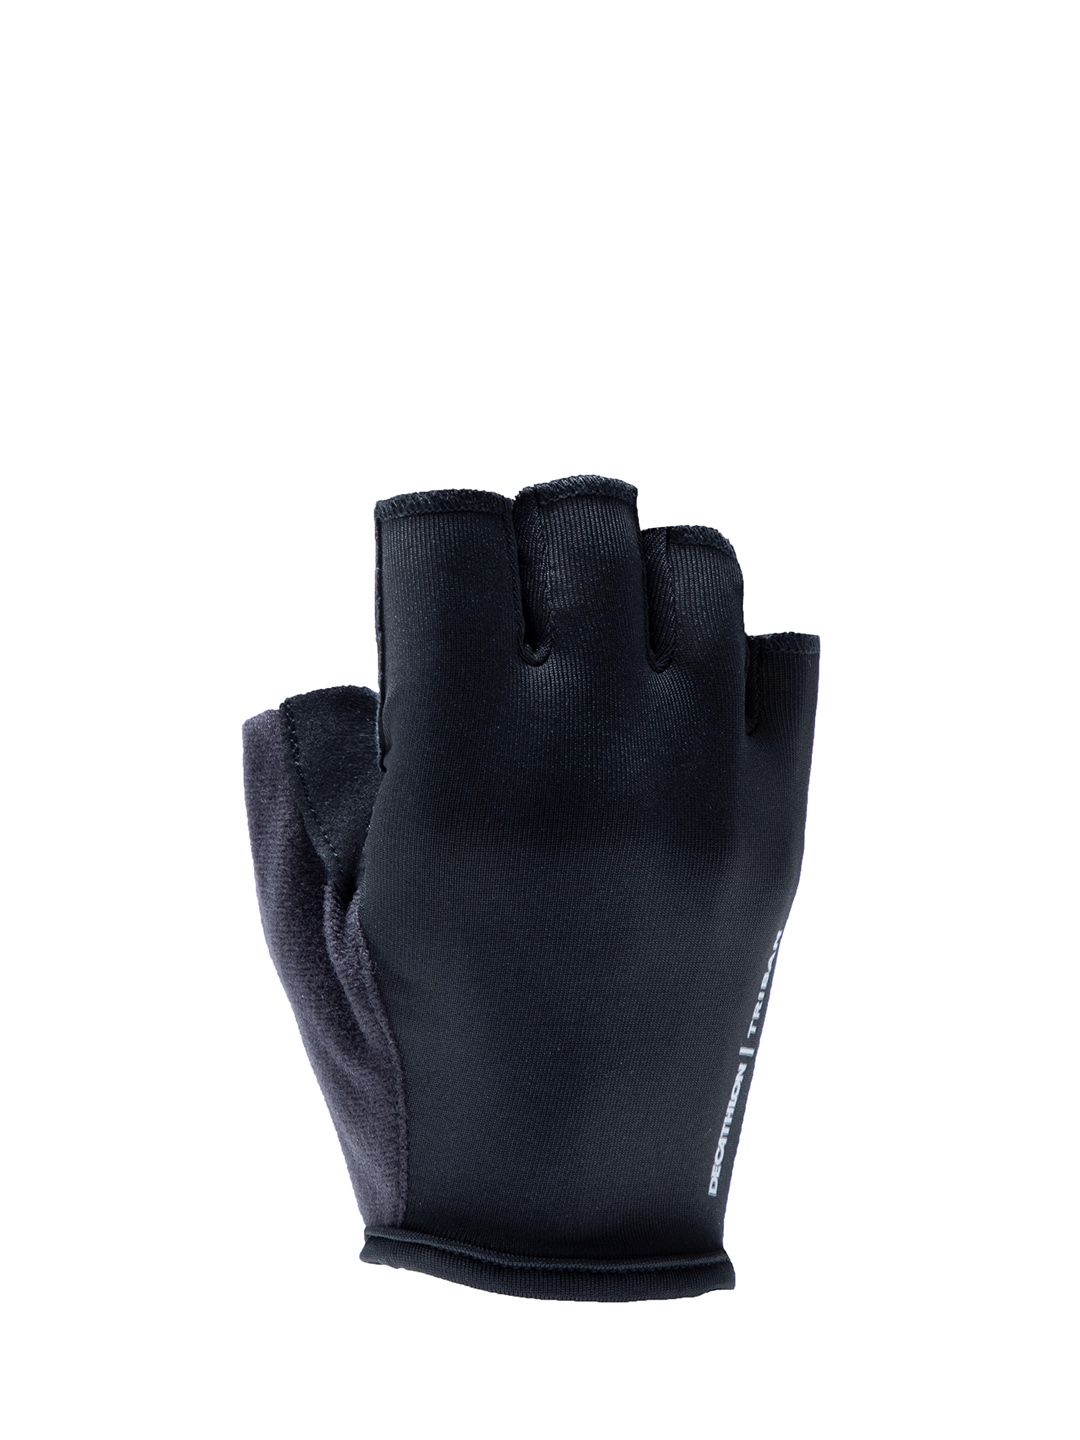 TRIBAN By Decathlon Unisex Black Solid 100 Road Cycling Touring Gloves Price in India